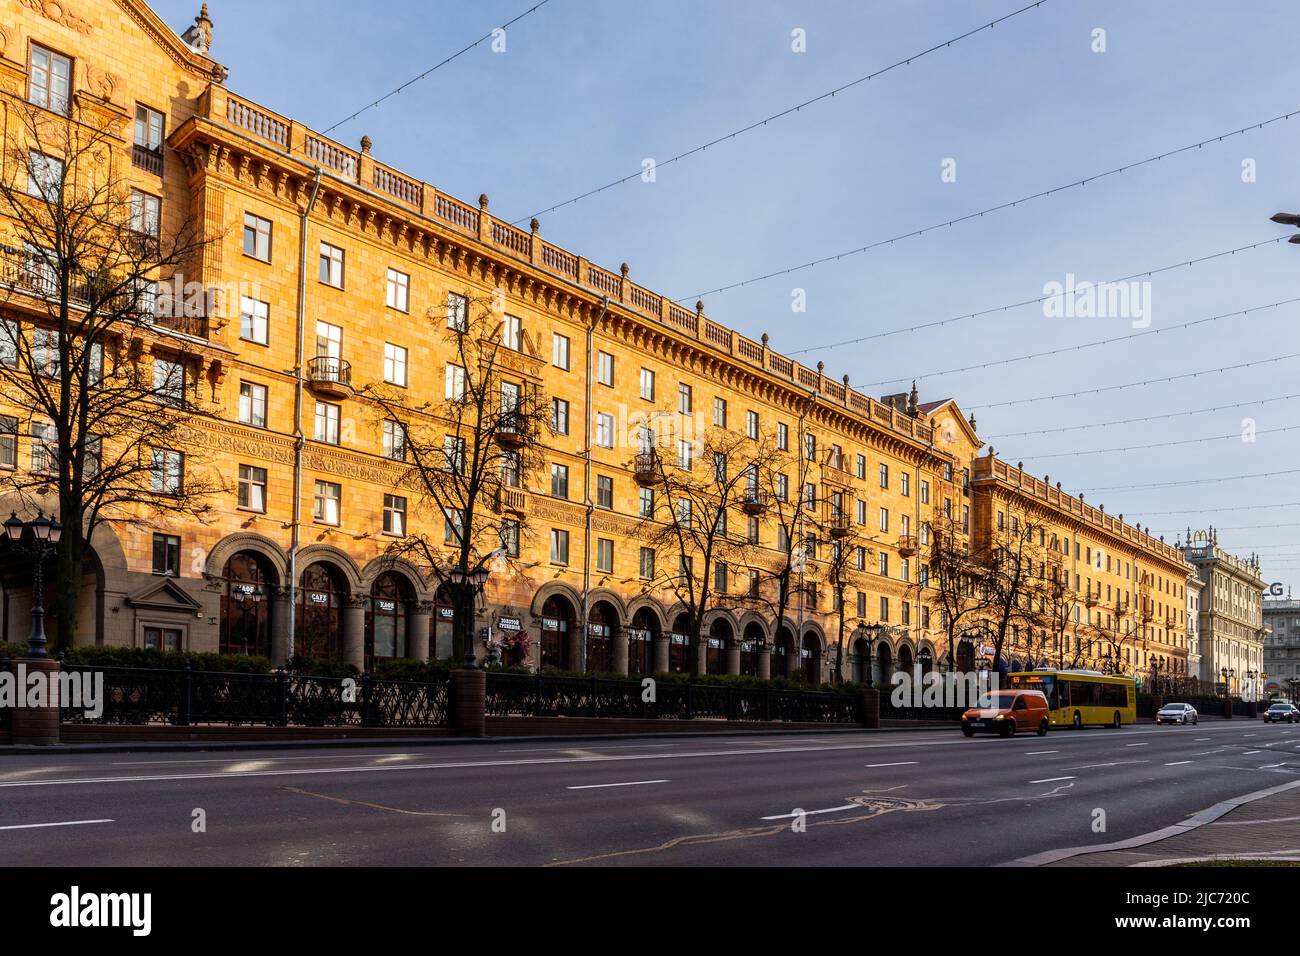 Minsk, Belarus, 04.11.21. Orange brick building in neo-classicism architecture style in Minsk on Lenin Street with cafes and restaurants. Stock Photo